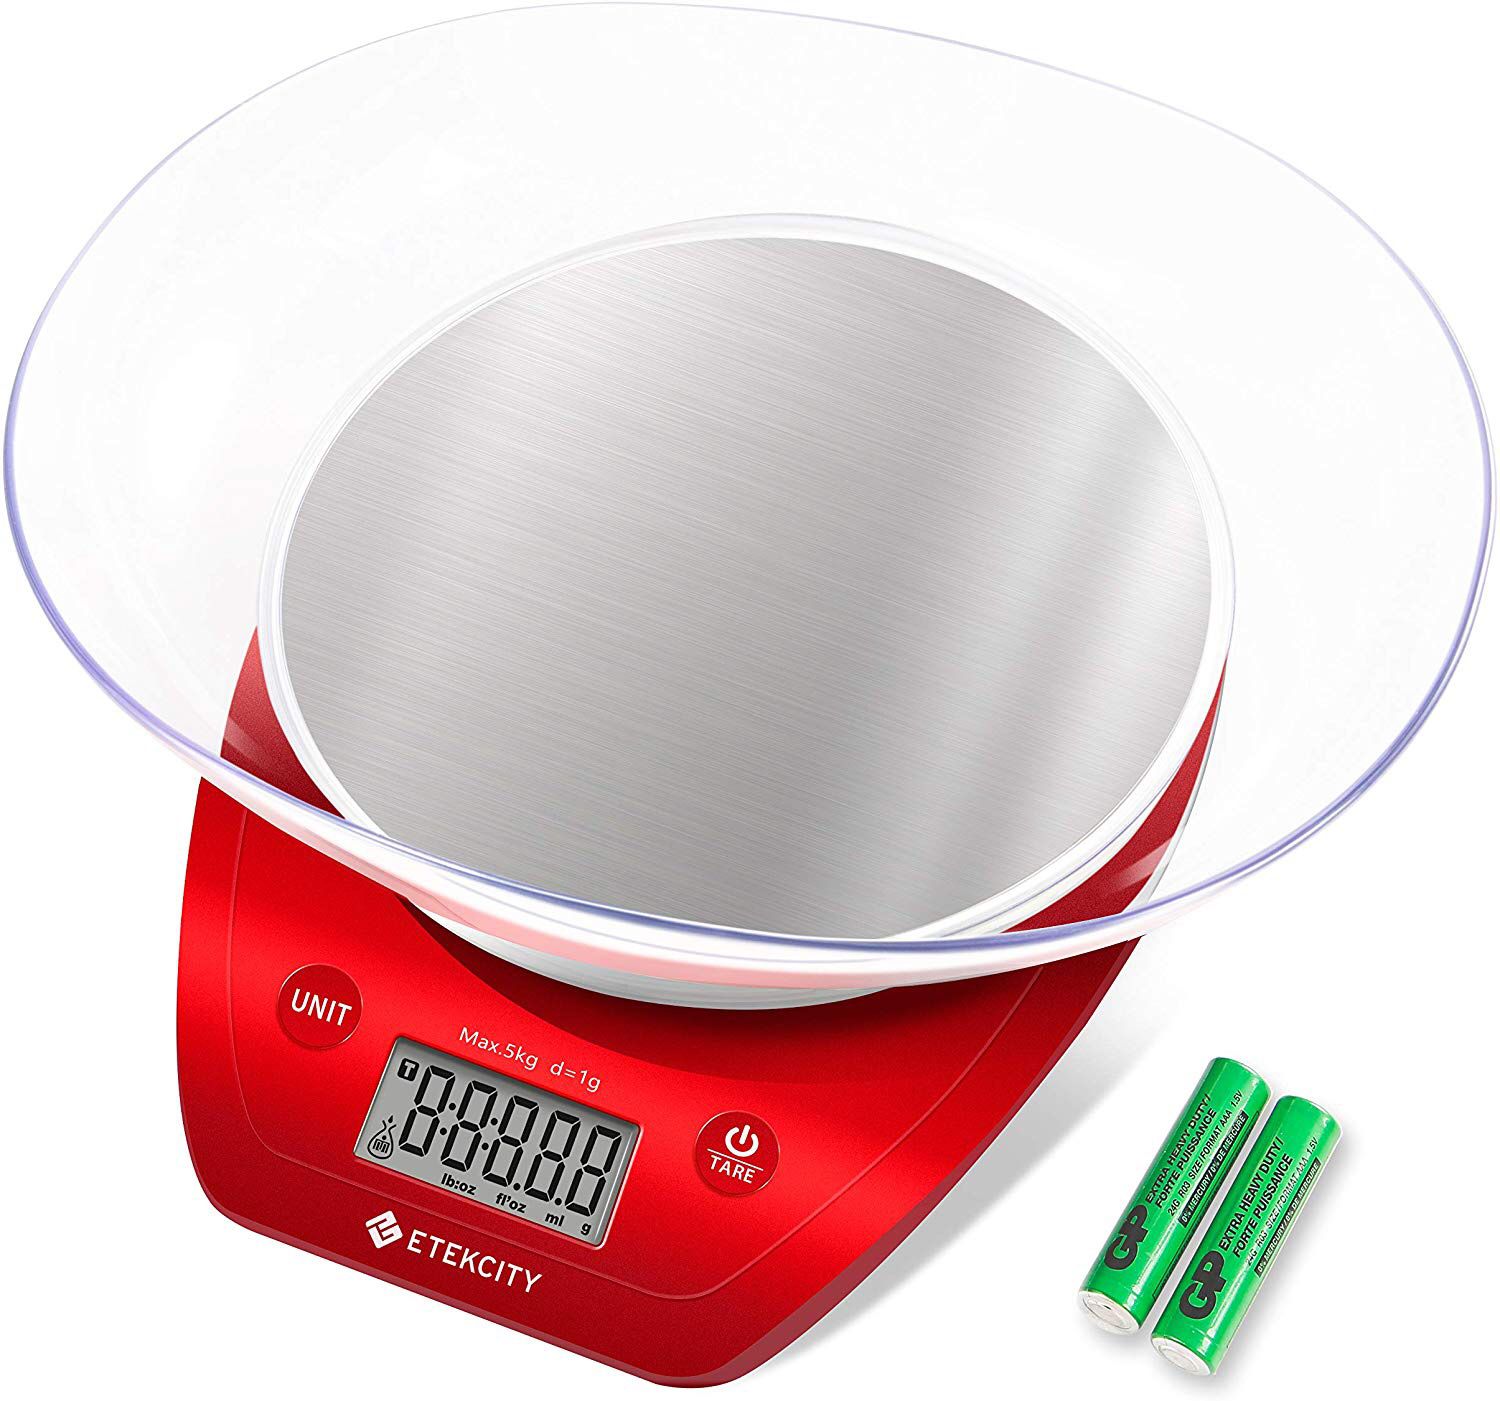 Etekcity Food Kitchen Scale Digital Weight Grams and Oz, Removalble Bowl for Cooking and Baking, Red/Stainless Steel